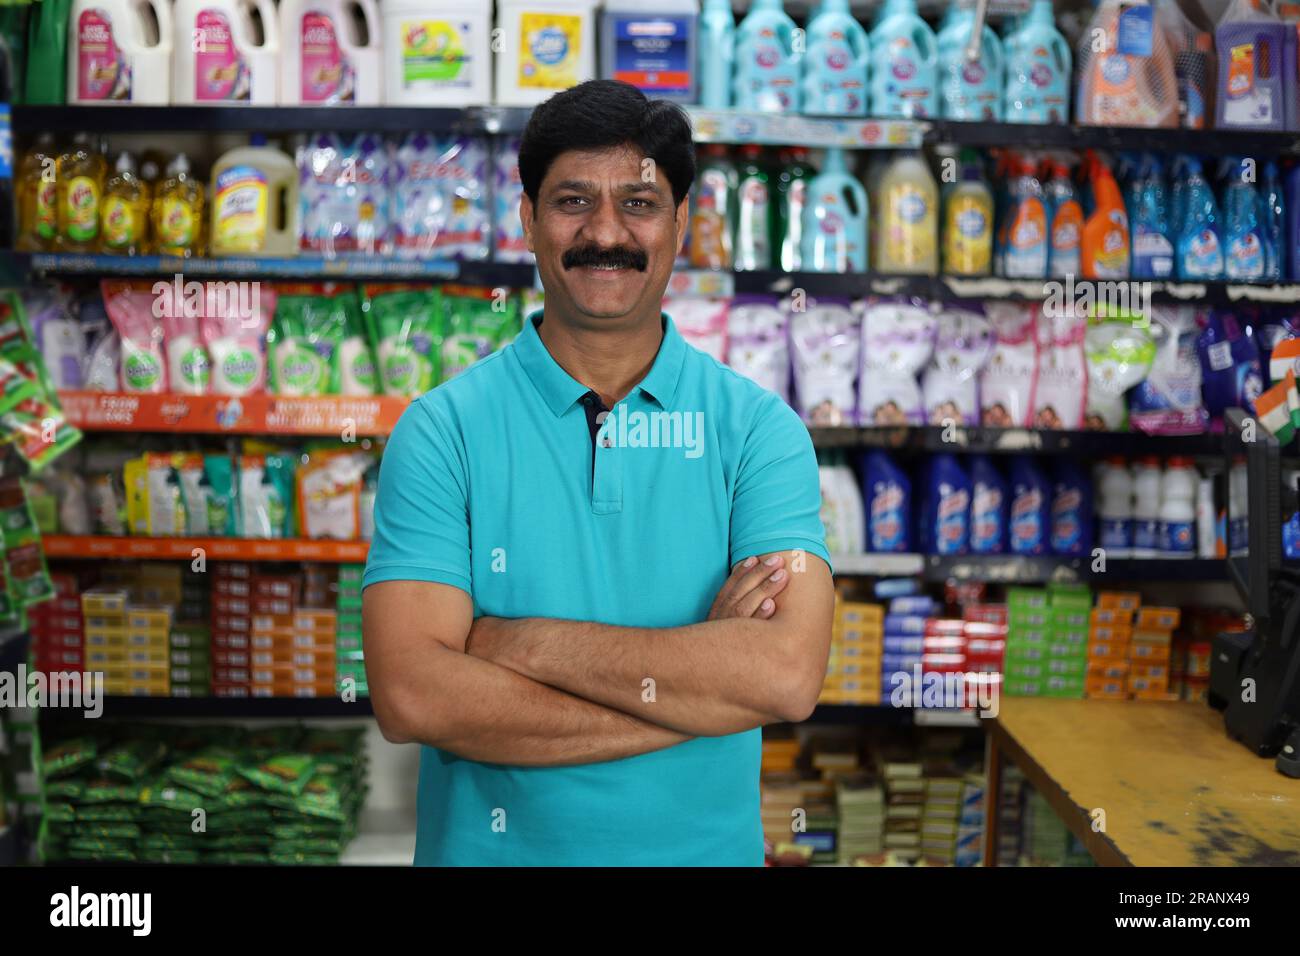 Portrait of Happy and smiling Indian man purchasing in a grocery store. Buying grocery for home in a supermarket. Confident and fit man in moustache. Stock Photo